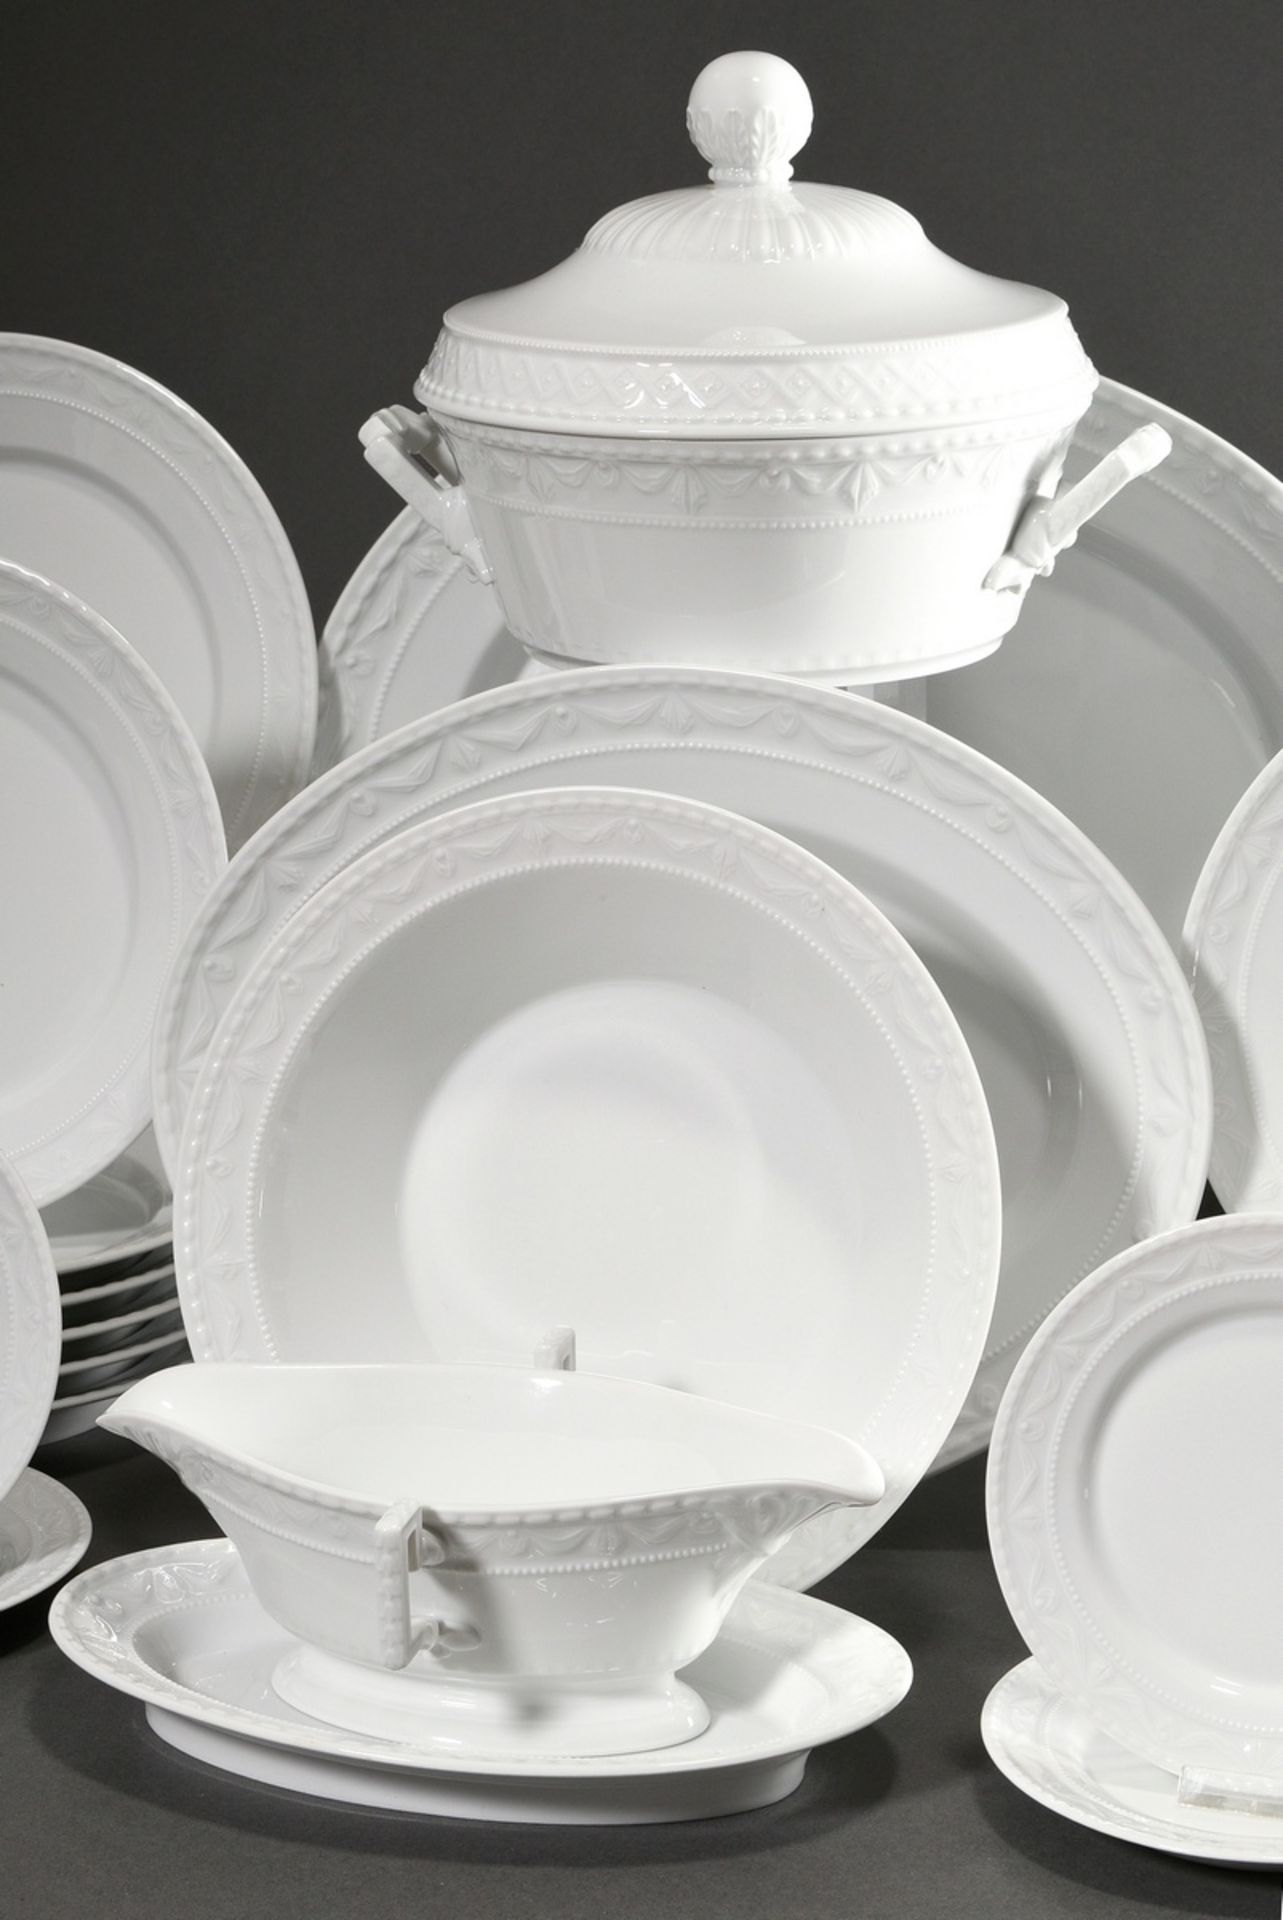 53 Pieces KPM dinner service "Kurland white" with relief border, consisting of: 14 dinner plates (Ø